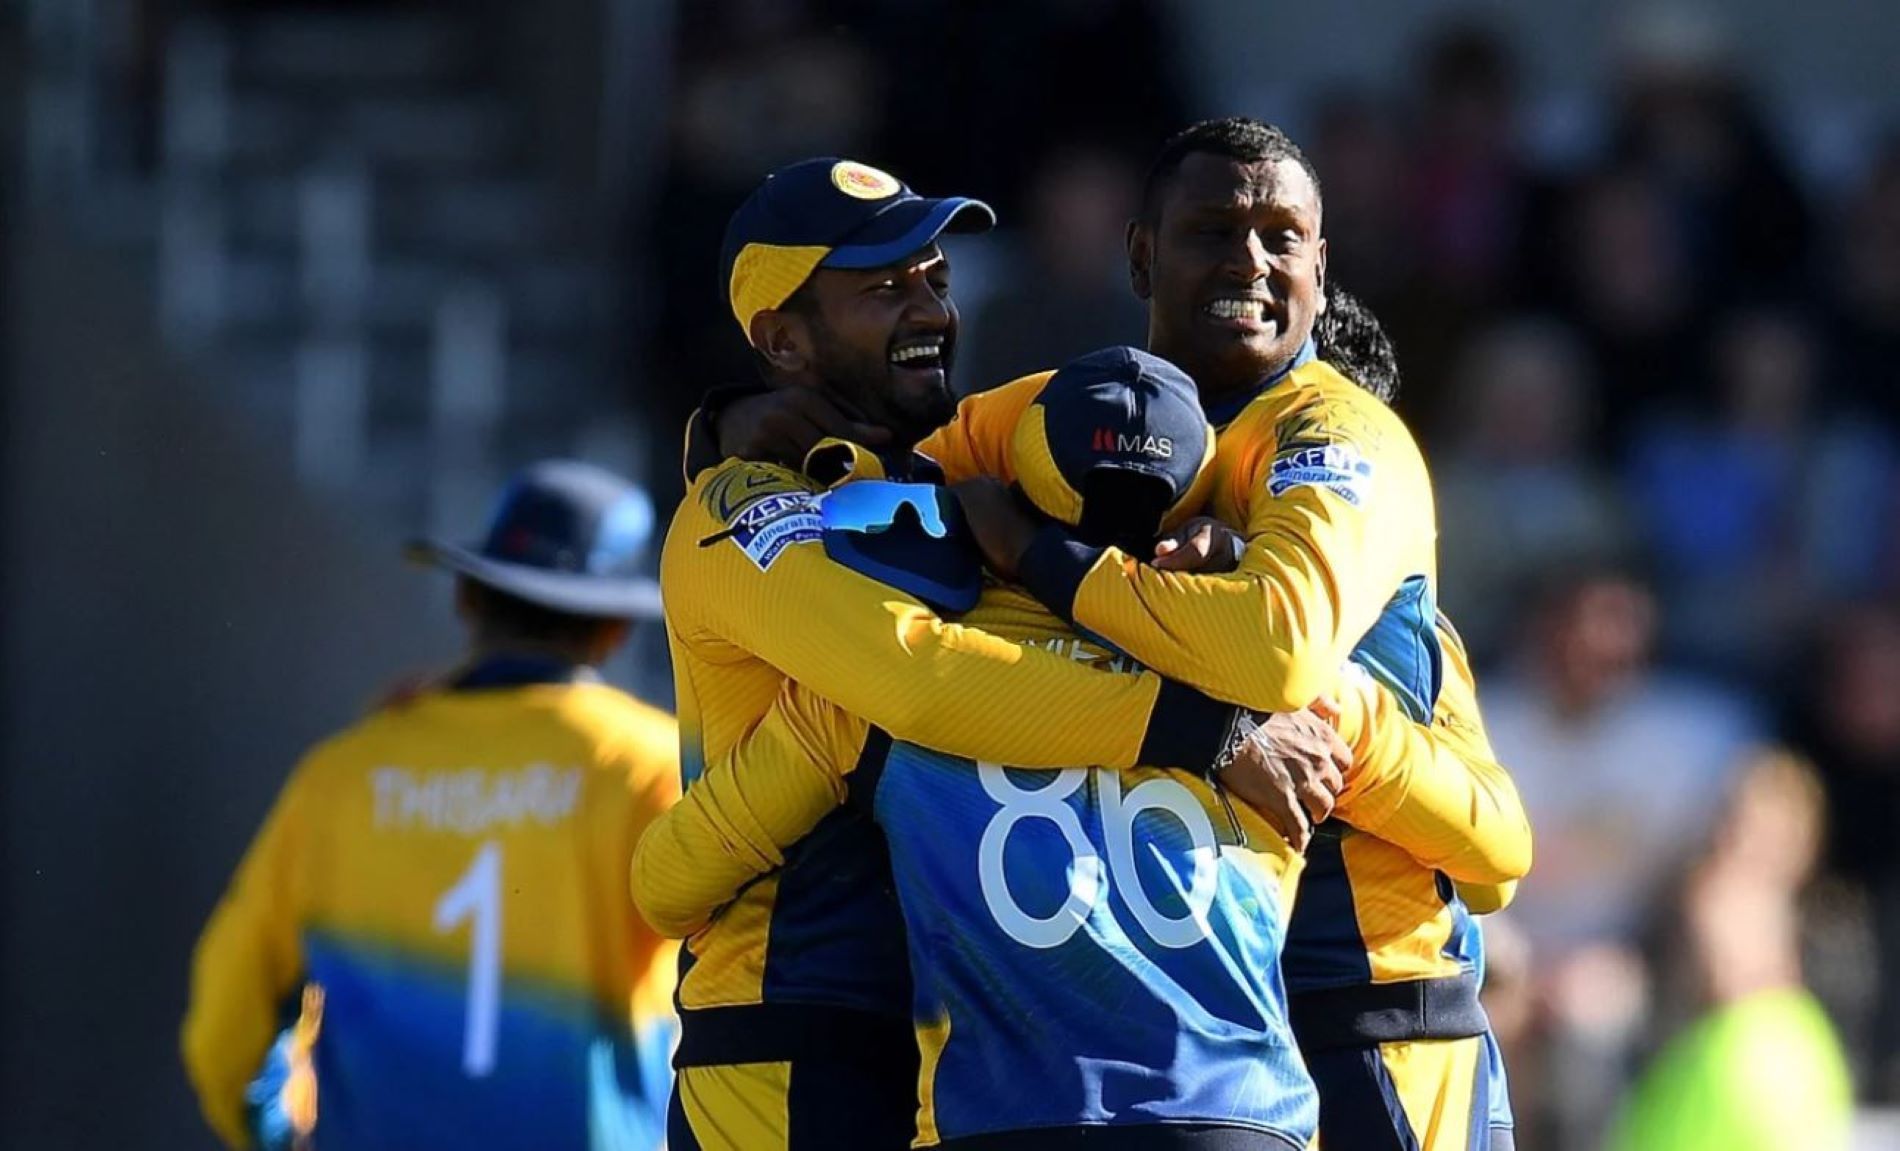 Sri Lanka pulled off a stunning win to have the hosts on the brink of elimination.